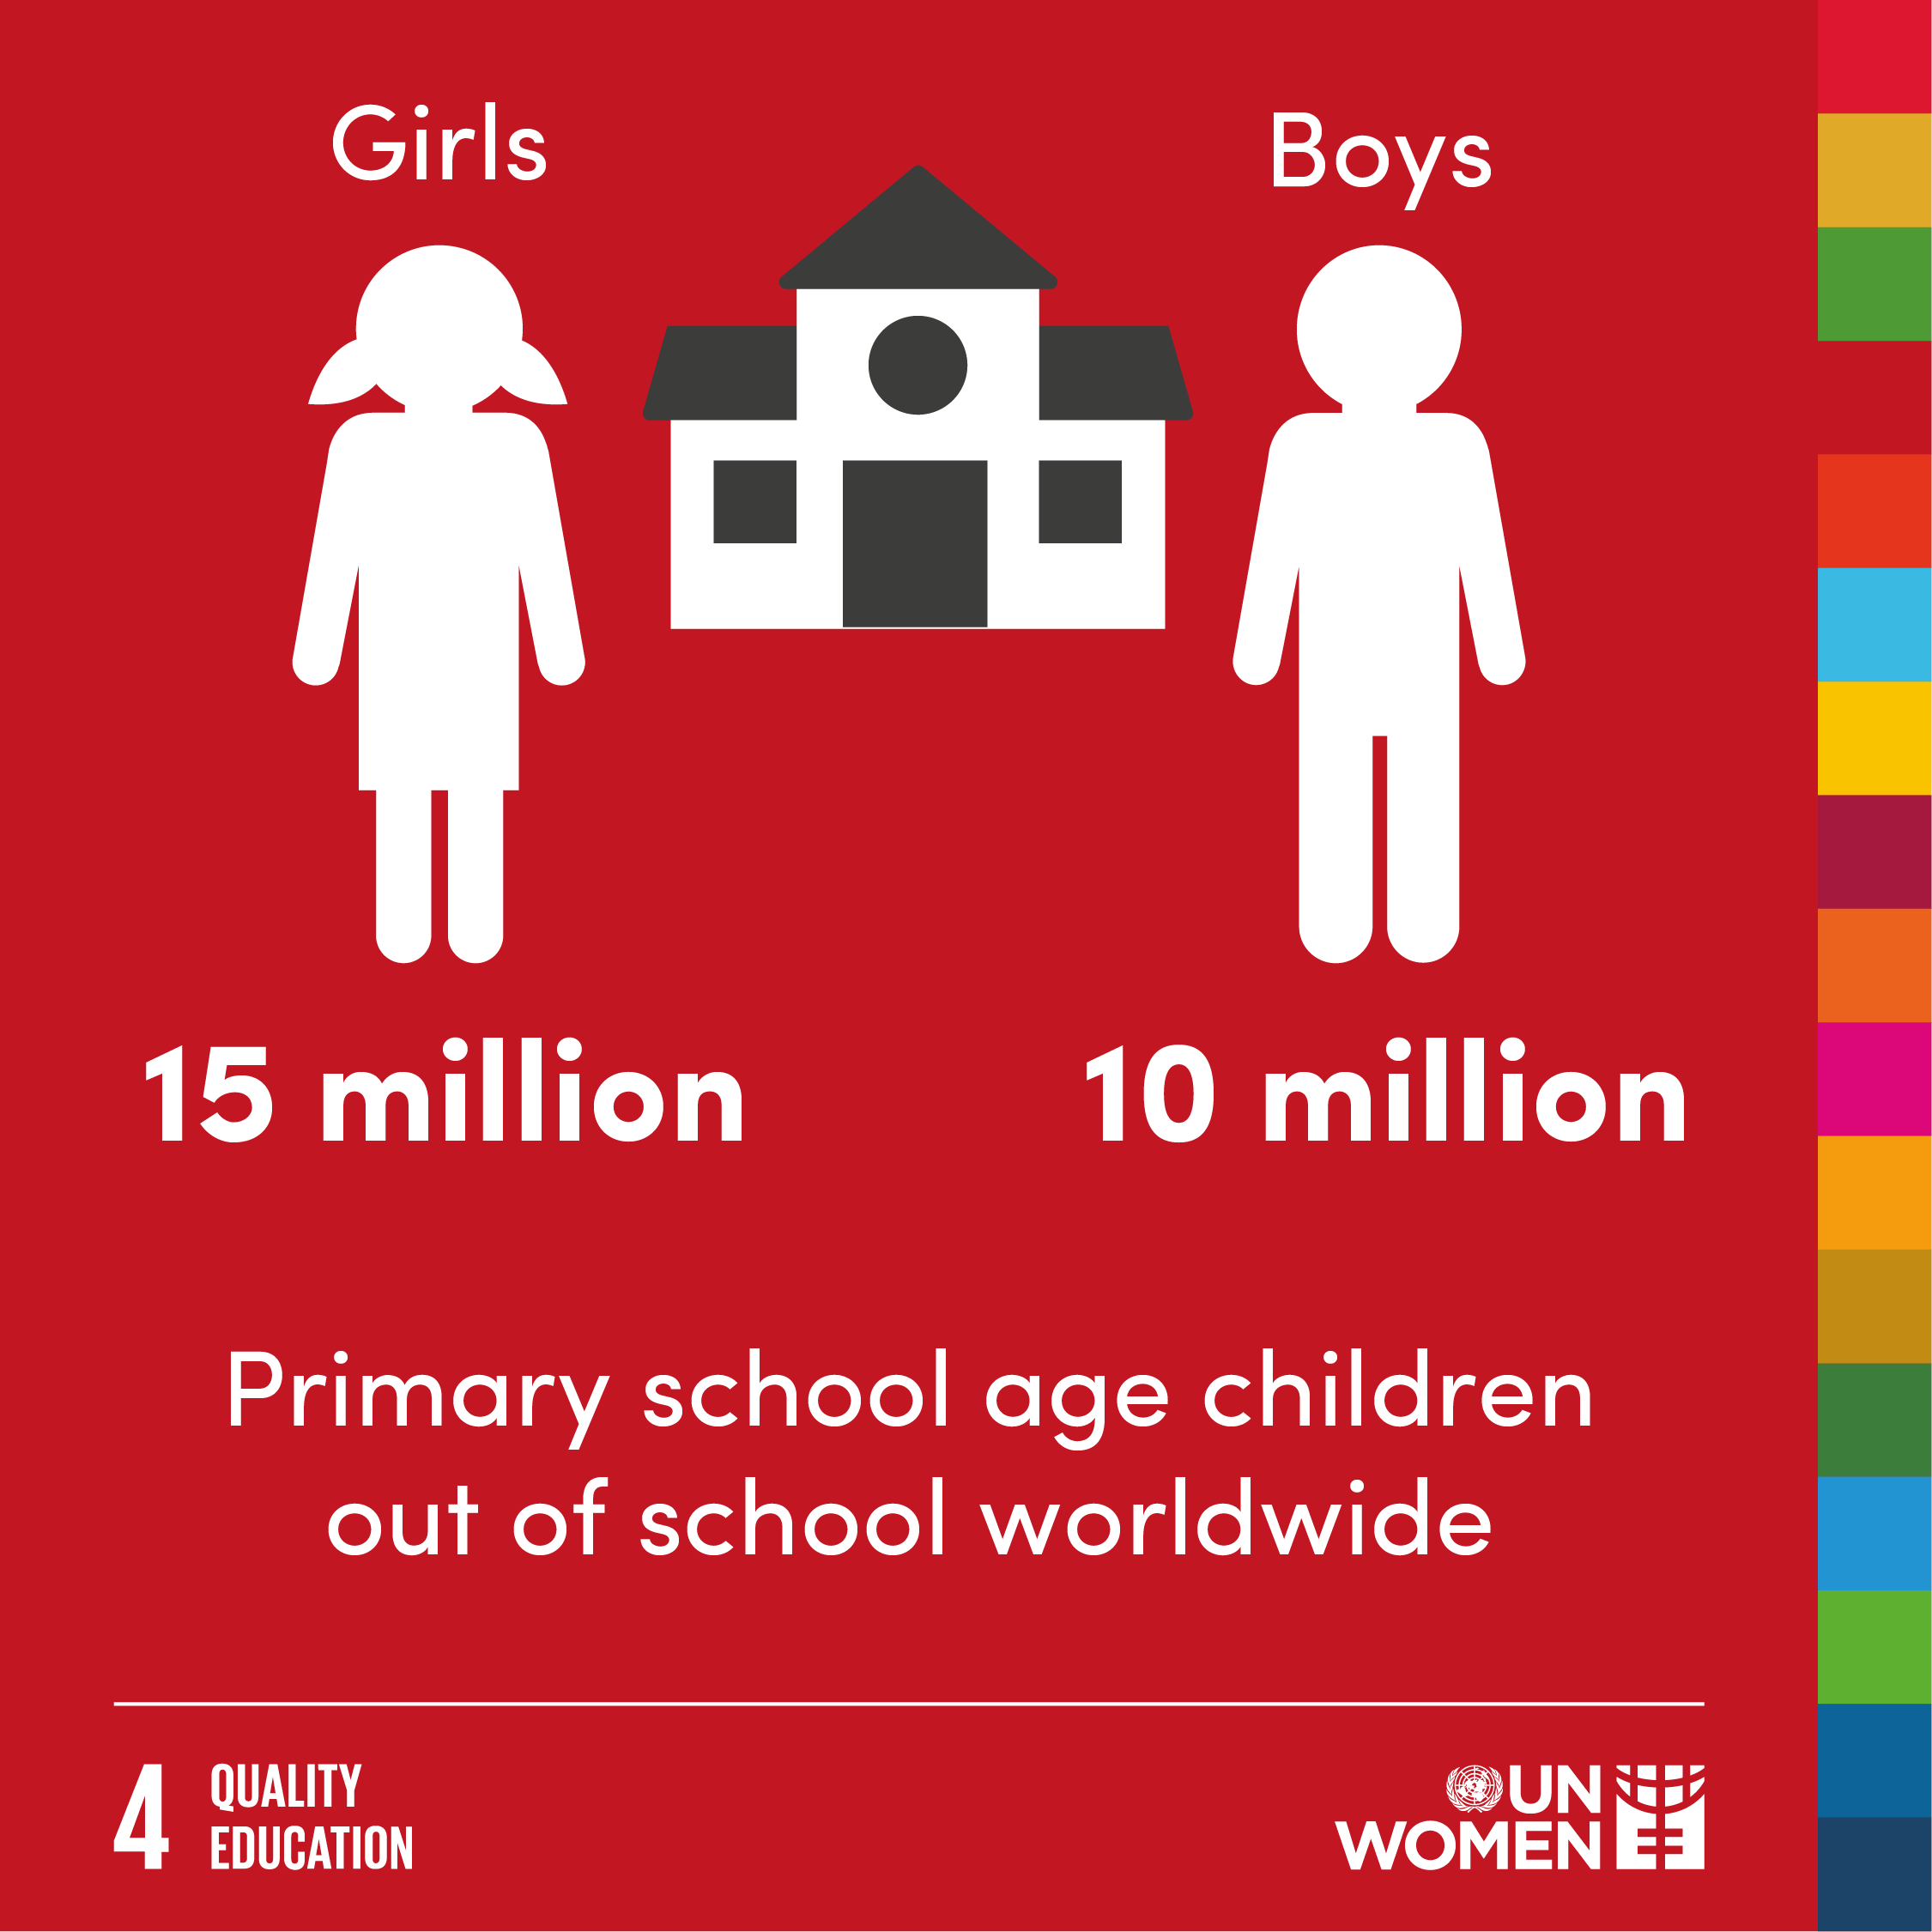 15 million girls and 10 million boys primary school age are out of school worldwide. 